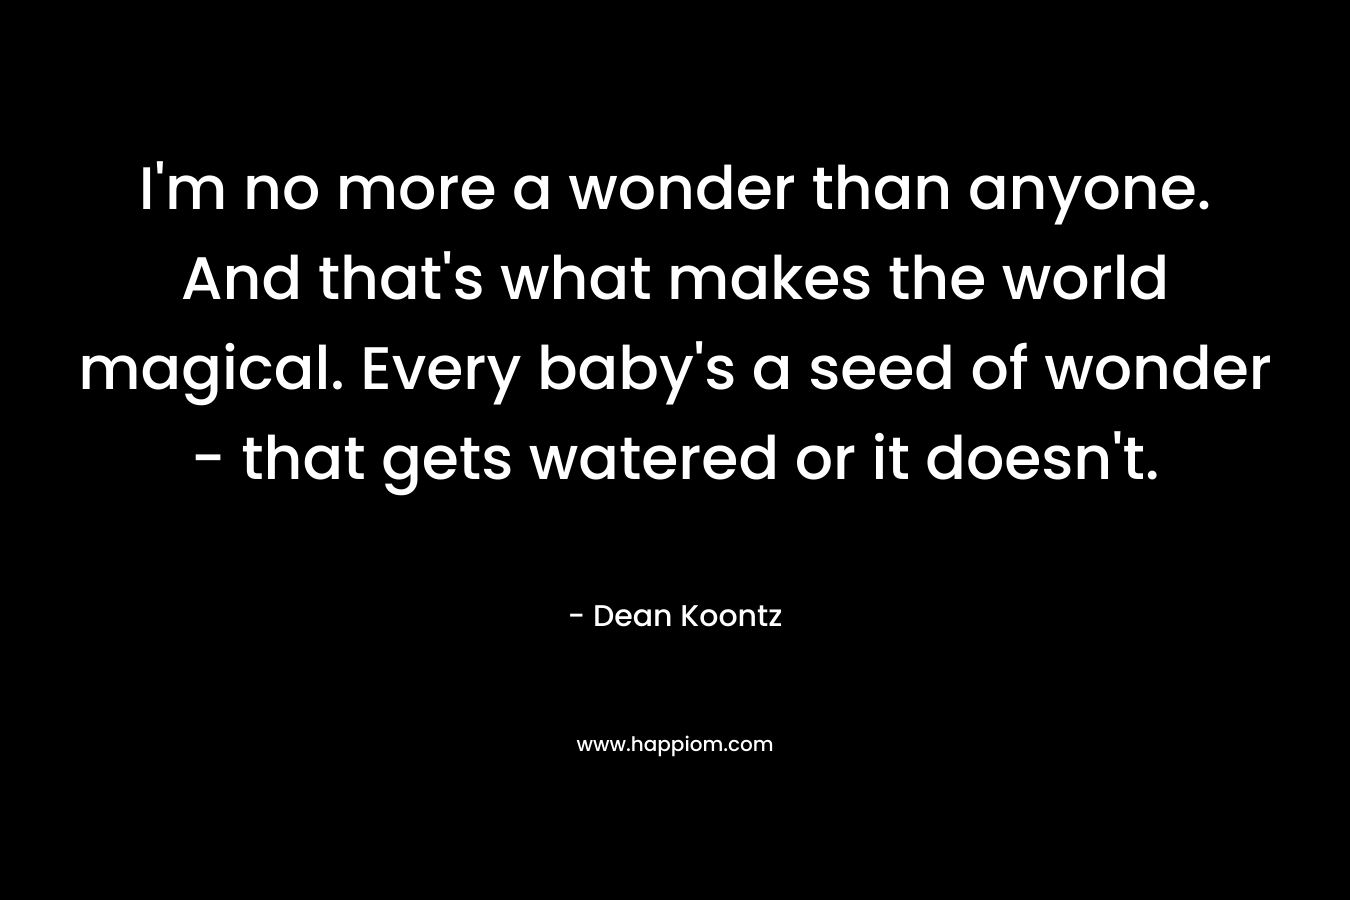 I’m no more a wonder than anyone. And that’s what makes the world magical. Every baby’s a seed of wonder – that gets watered or it doesn’t. – Dean Koontz